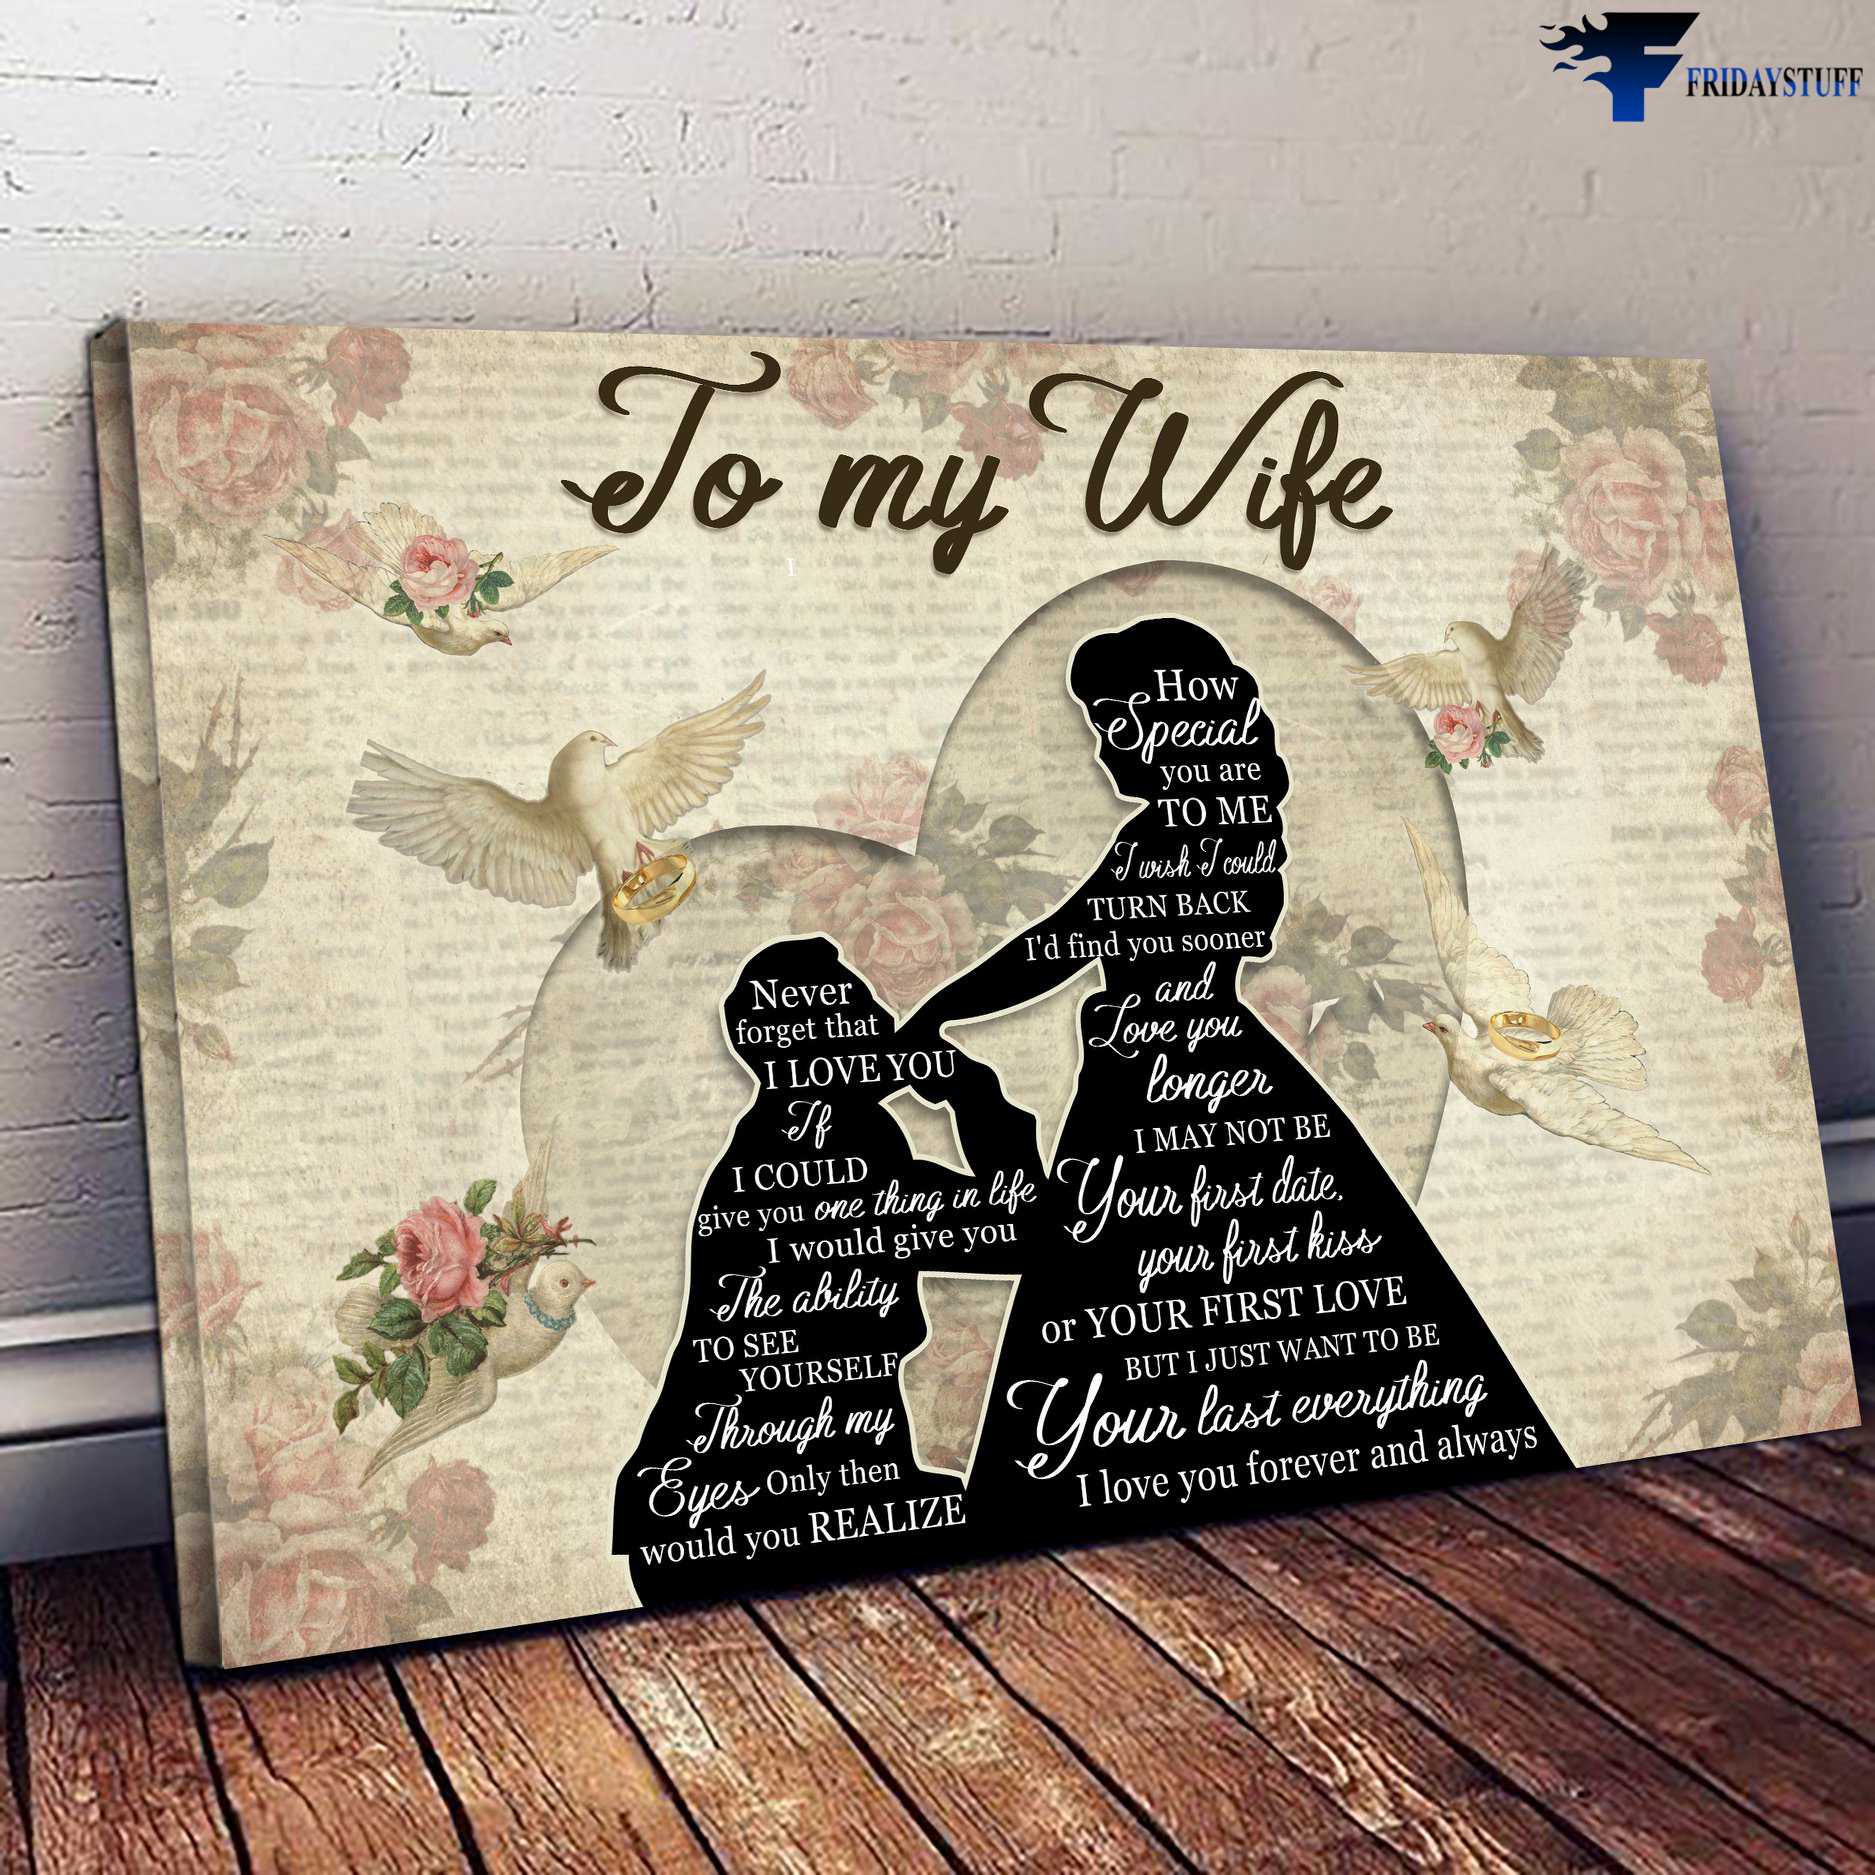 Gift For Wife, Husband And Wife - To My Wife, Never Forget That I Love You, If I Could Give You One Thing In Life, I Would Give You The Ability To See Yourself